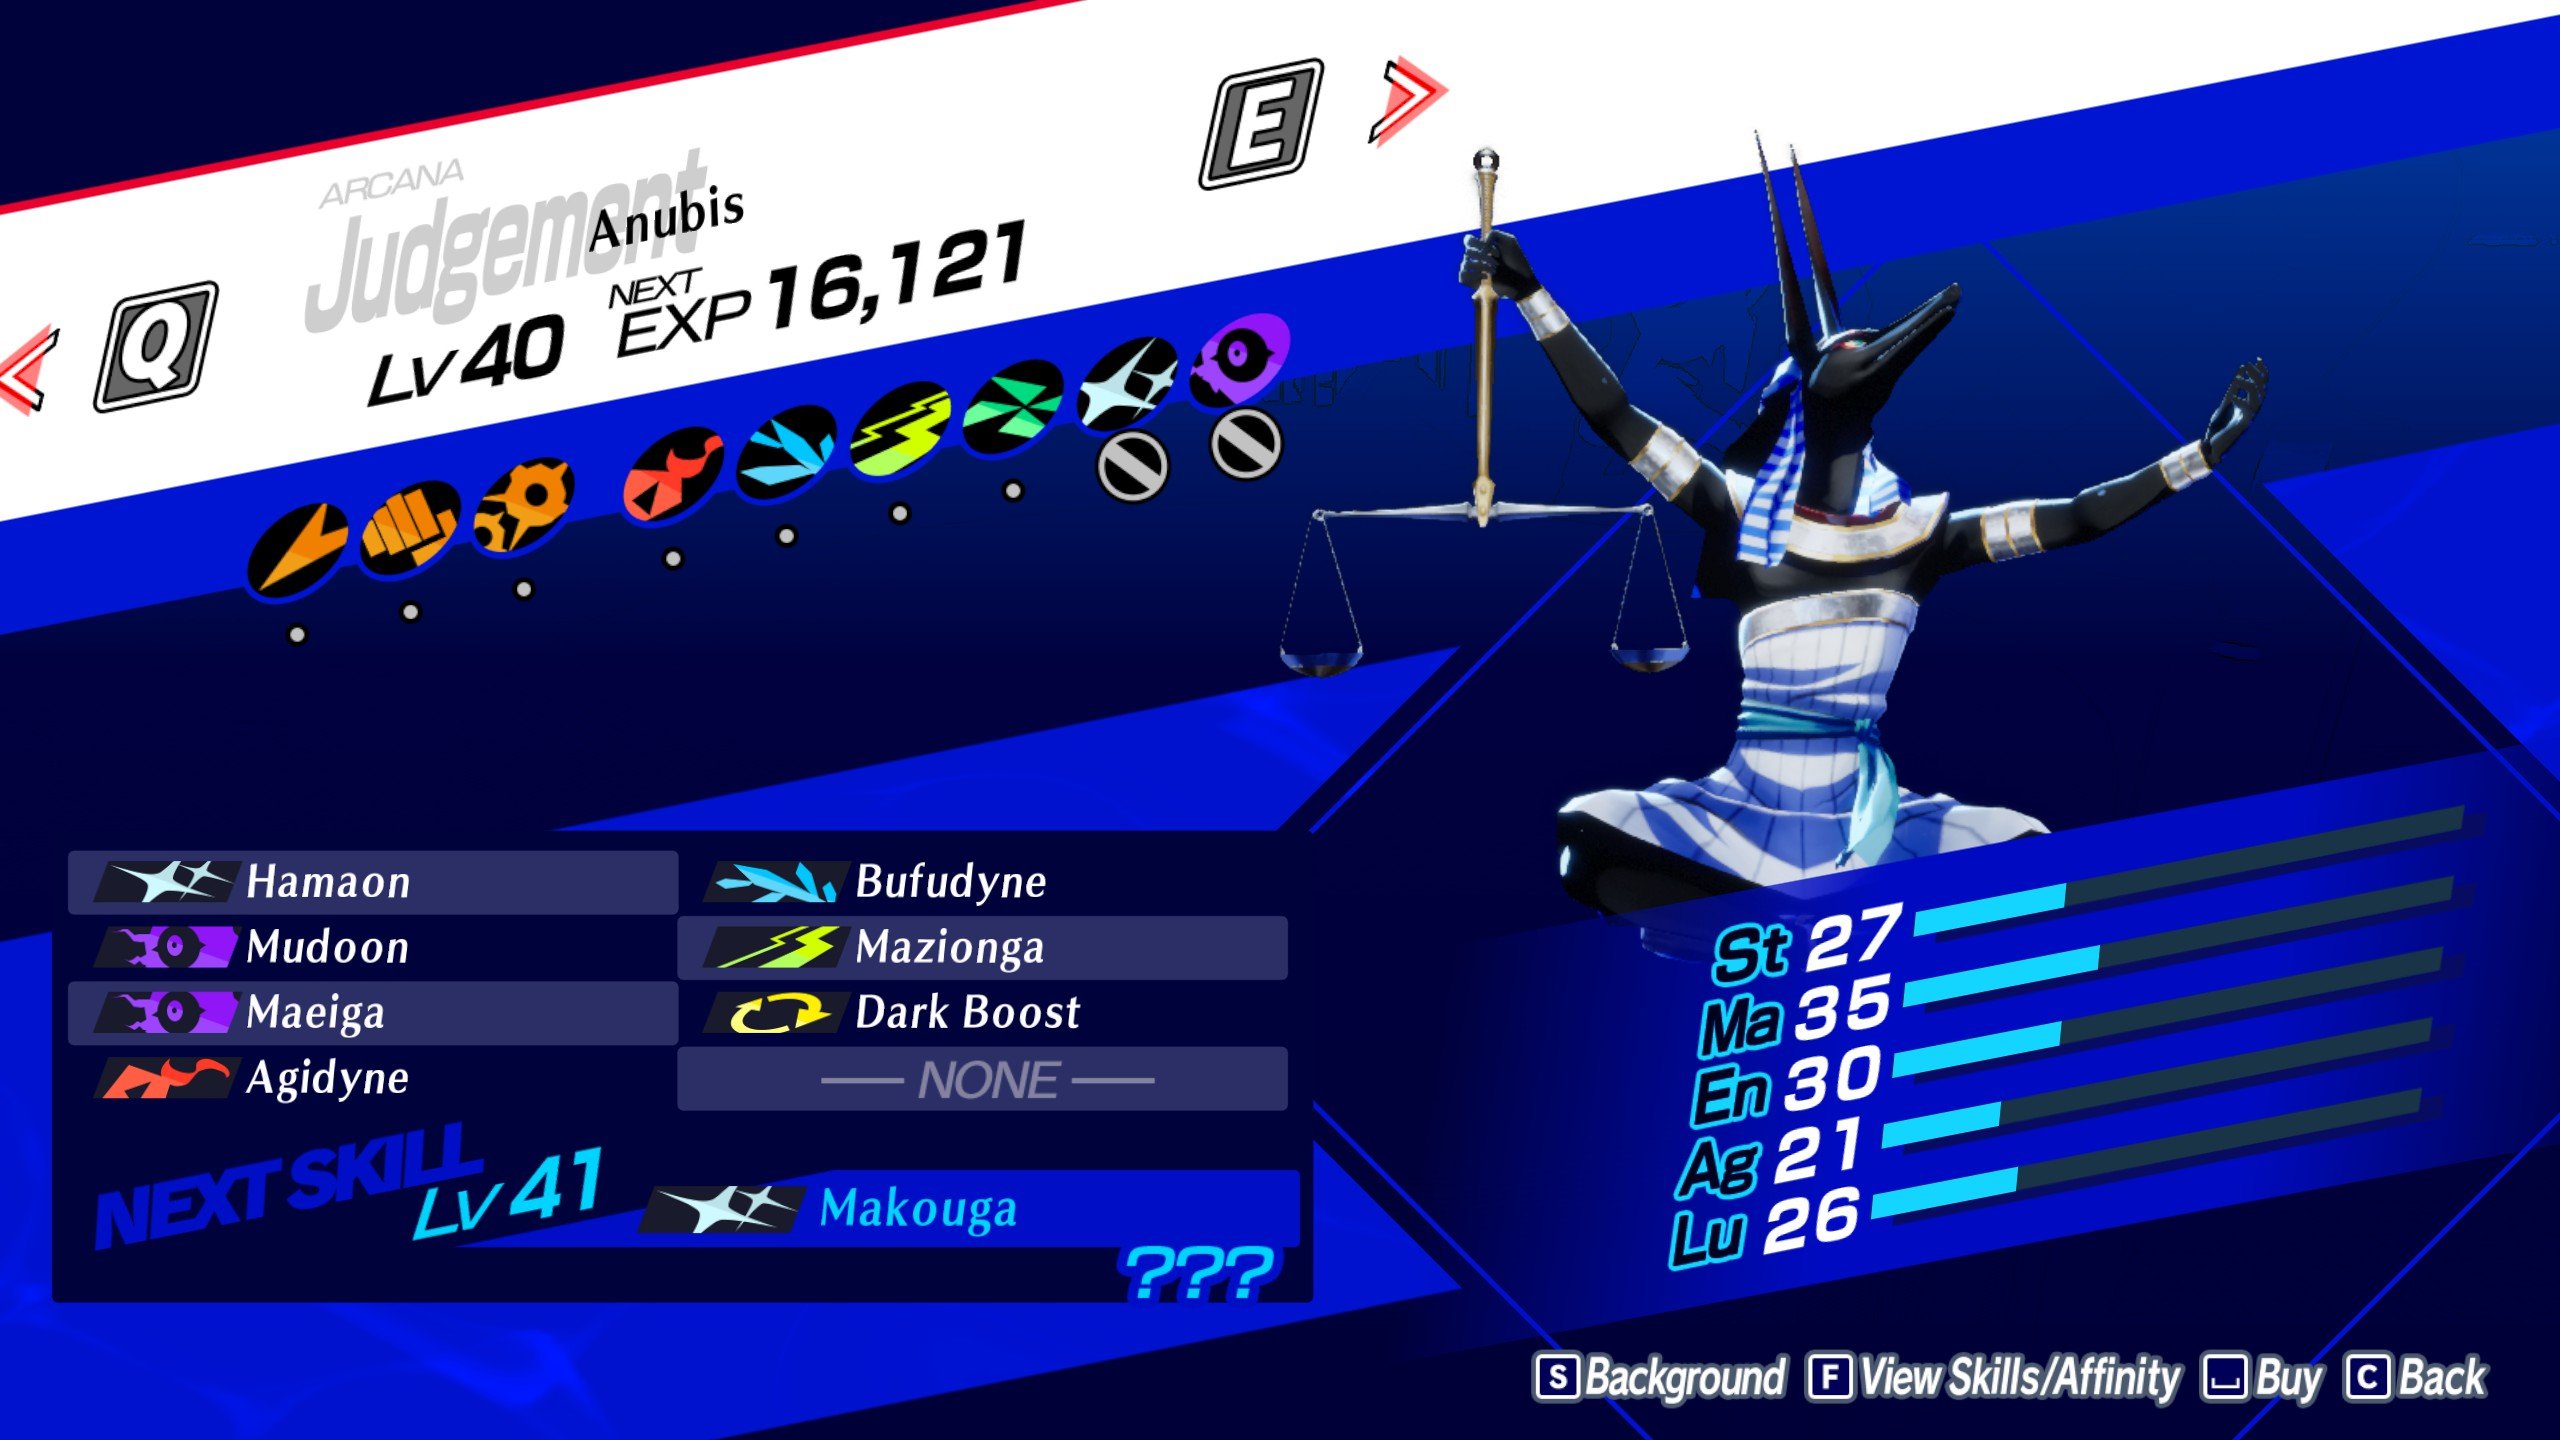 An image showcasing the Judgement Arcana in Persona 3 Reload.